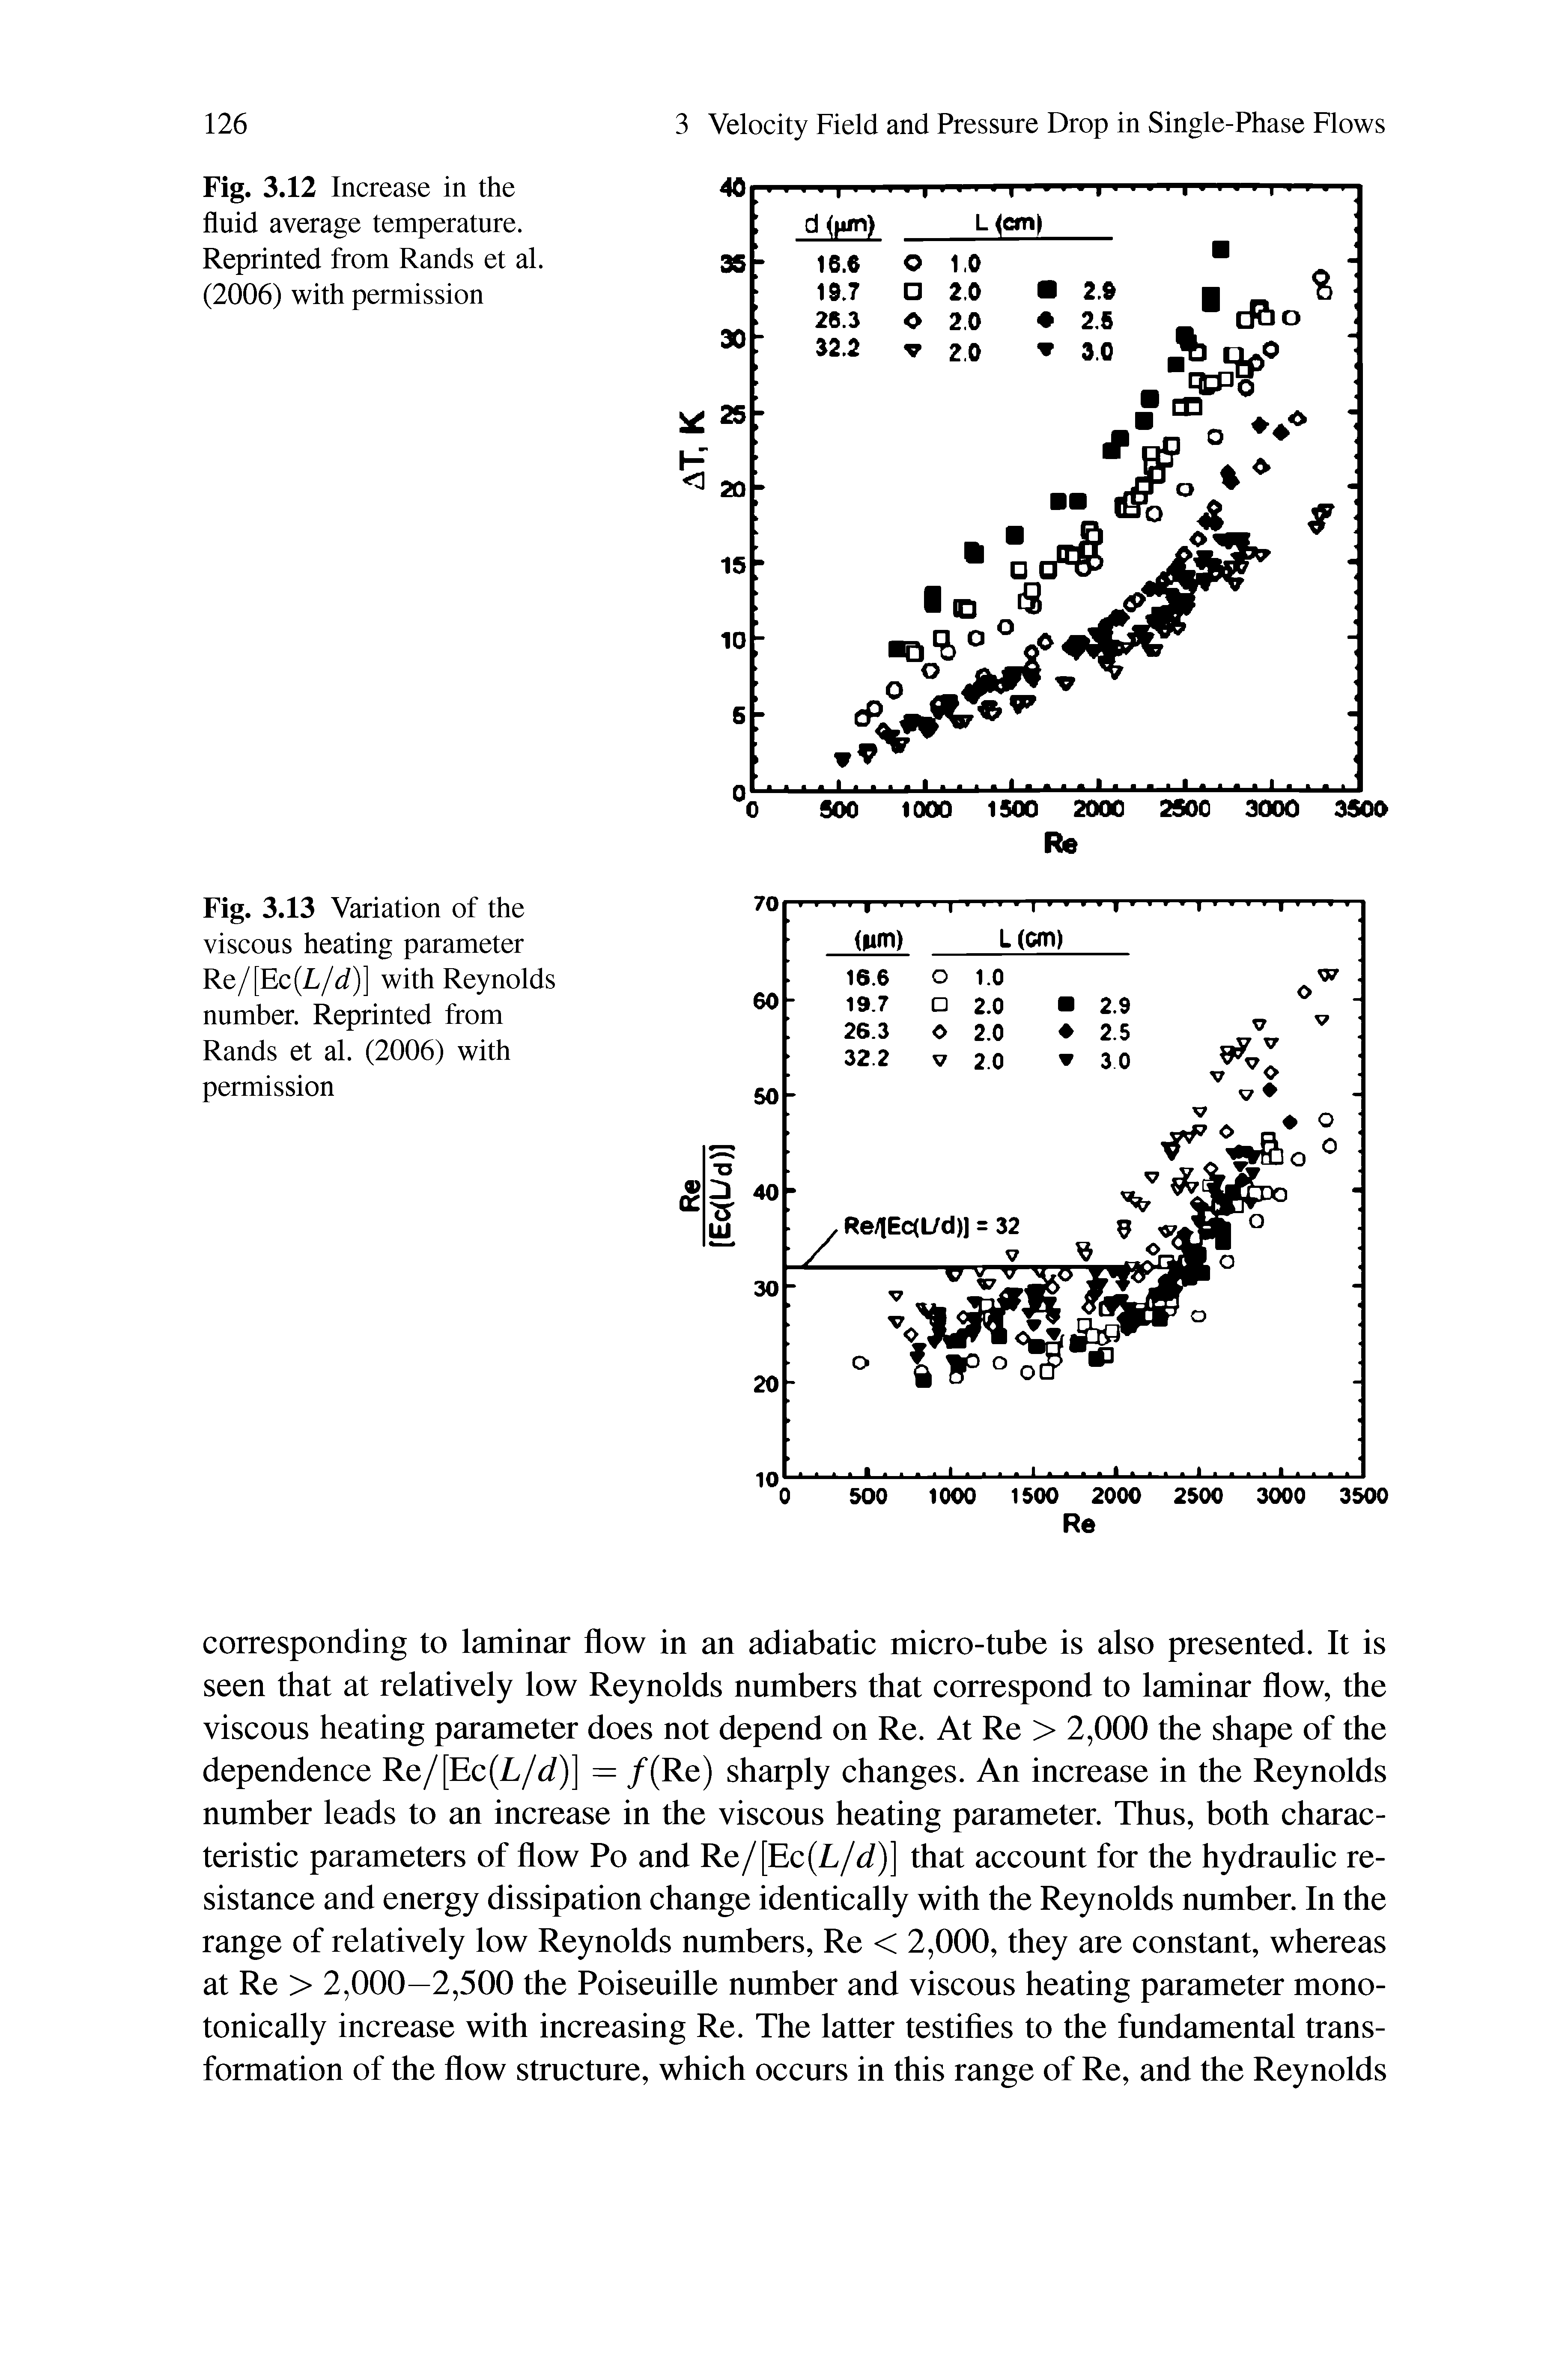 Fig. 3.13 Variation of the viscous heating parameter Re/[Ec(L/<i)] with Reynolds number. Reprinted from Rands et al. (2006) with permission...